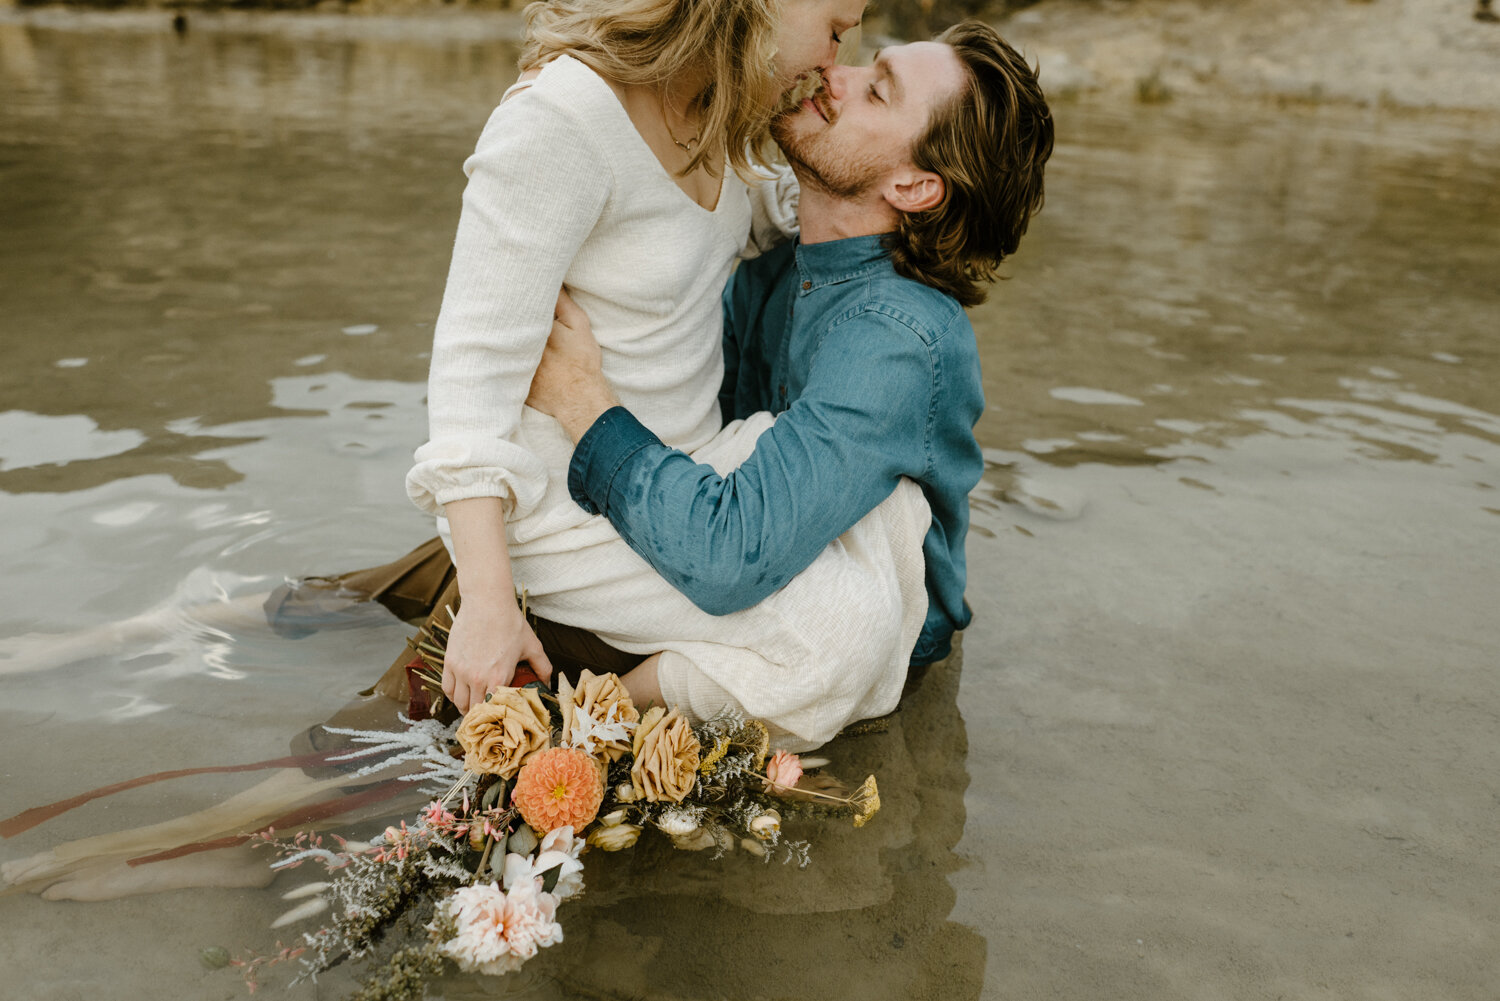 Austin, Texas Wedding Elopement Photography Packages